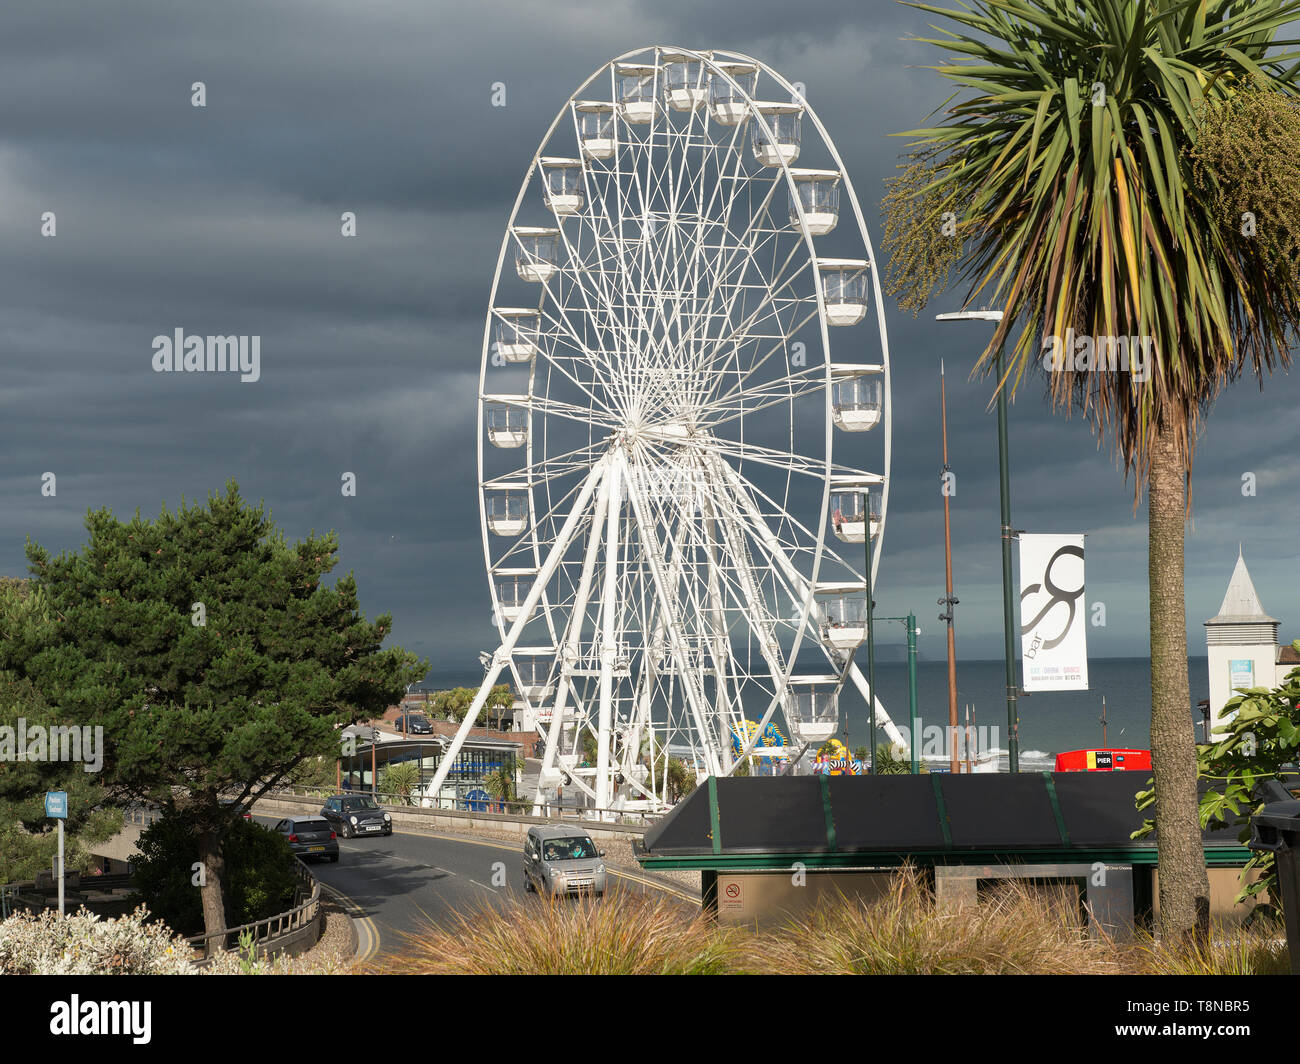 Bournemouth, United Kingdom - June 25, 2017; Big ferris wheel on the pier of Bournemouth a large and populair tourist destination on the coast of Sout Stock Photo